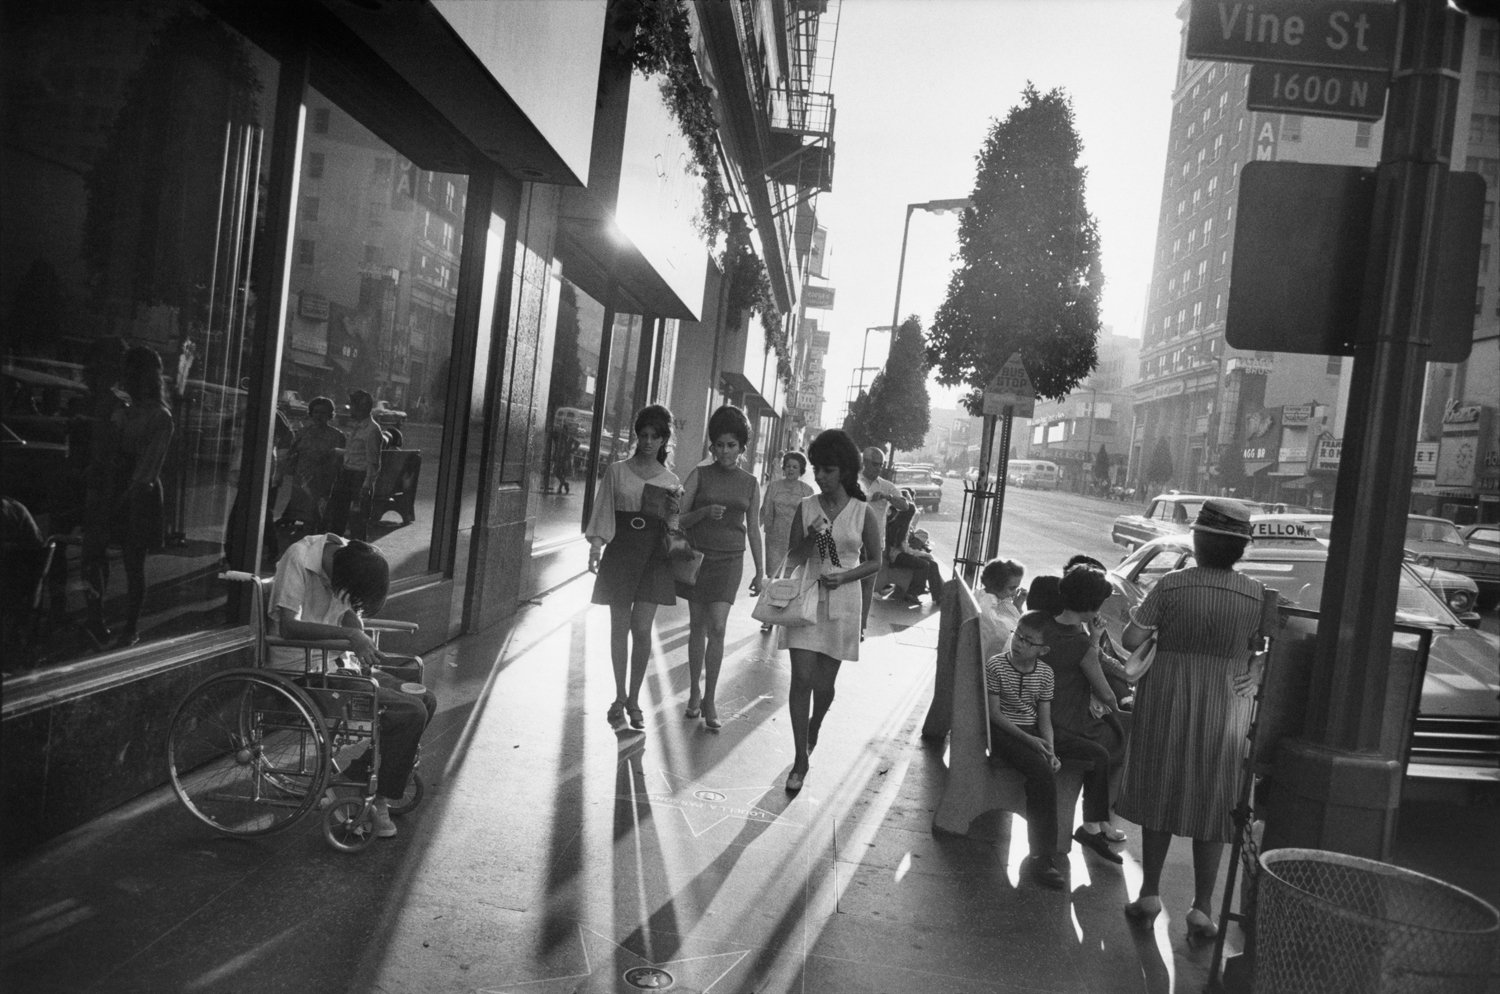  Garry Winogrand,  Los Angeles,  1969printed 1970s. Courtesy of the Pilara Family Foundation Collection and Sotheby’s.&nbsp; 